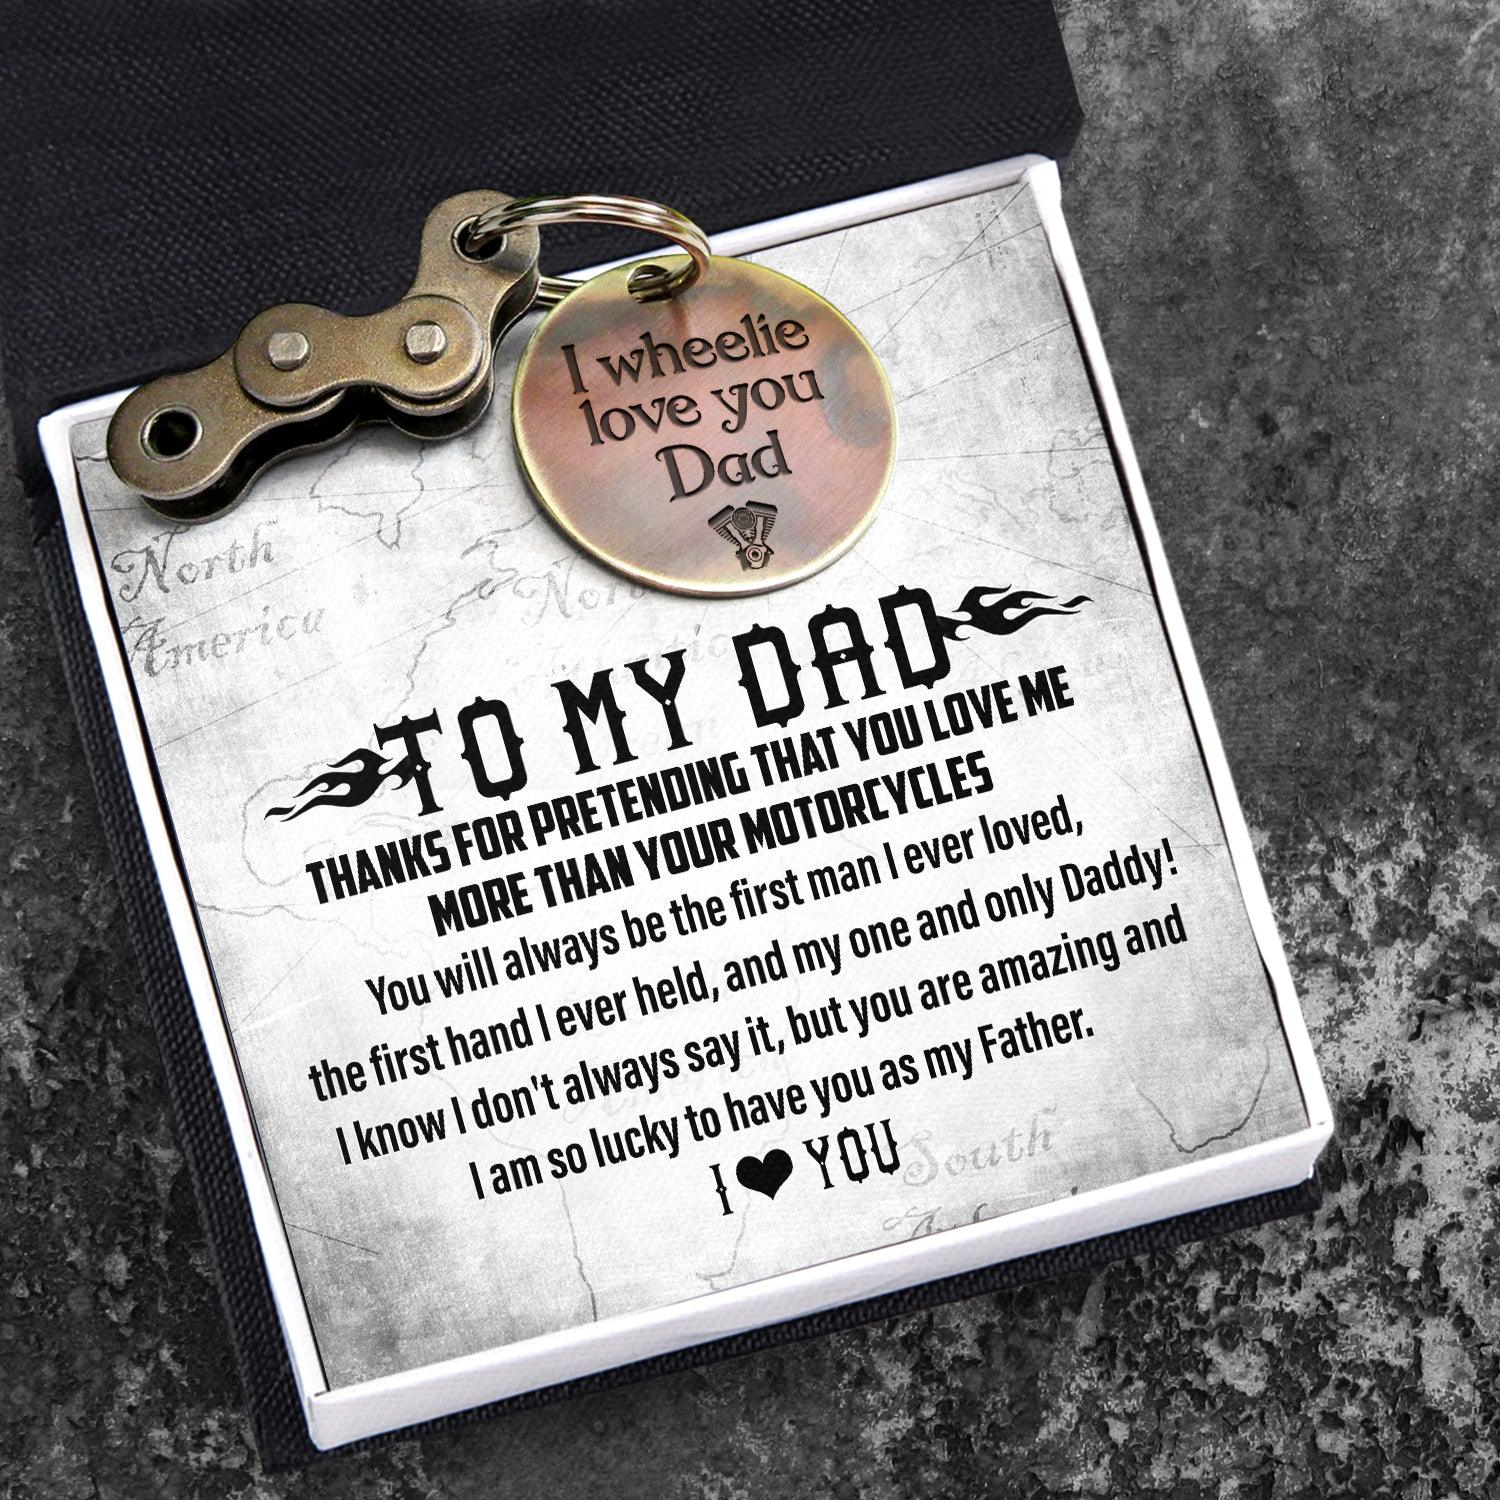 Motocross Keychain - Biker - To My Dad - From Daughter - My One And Only Daddy - Augkbf18006 - Gifts Holder